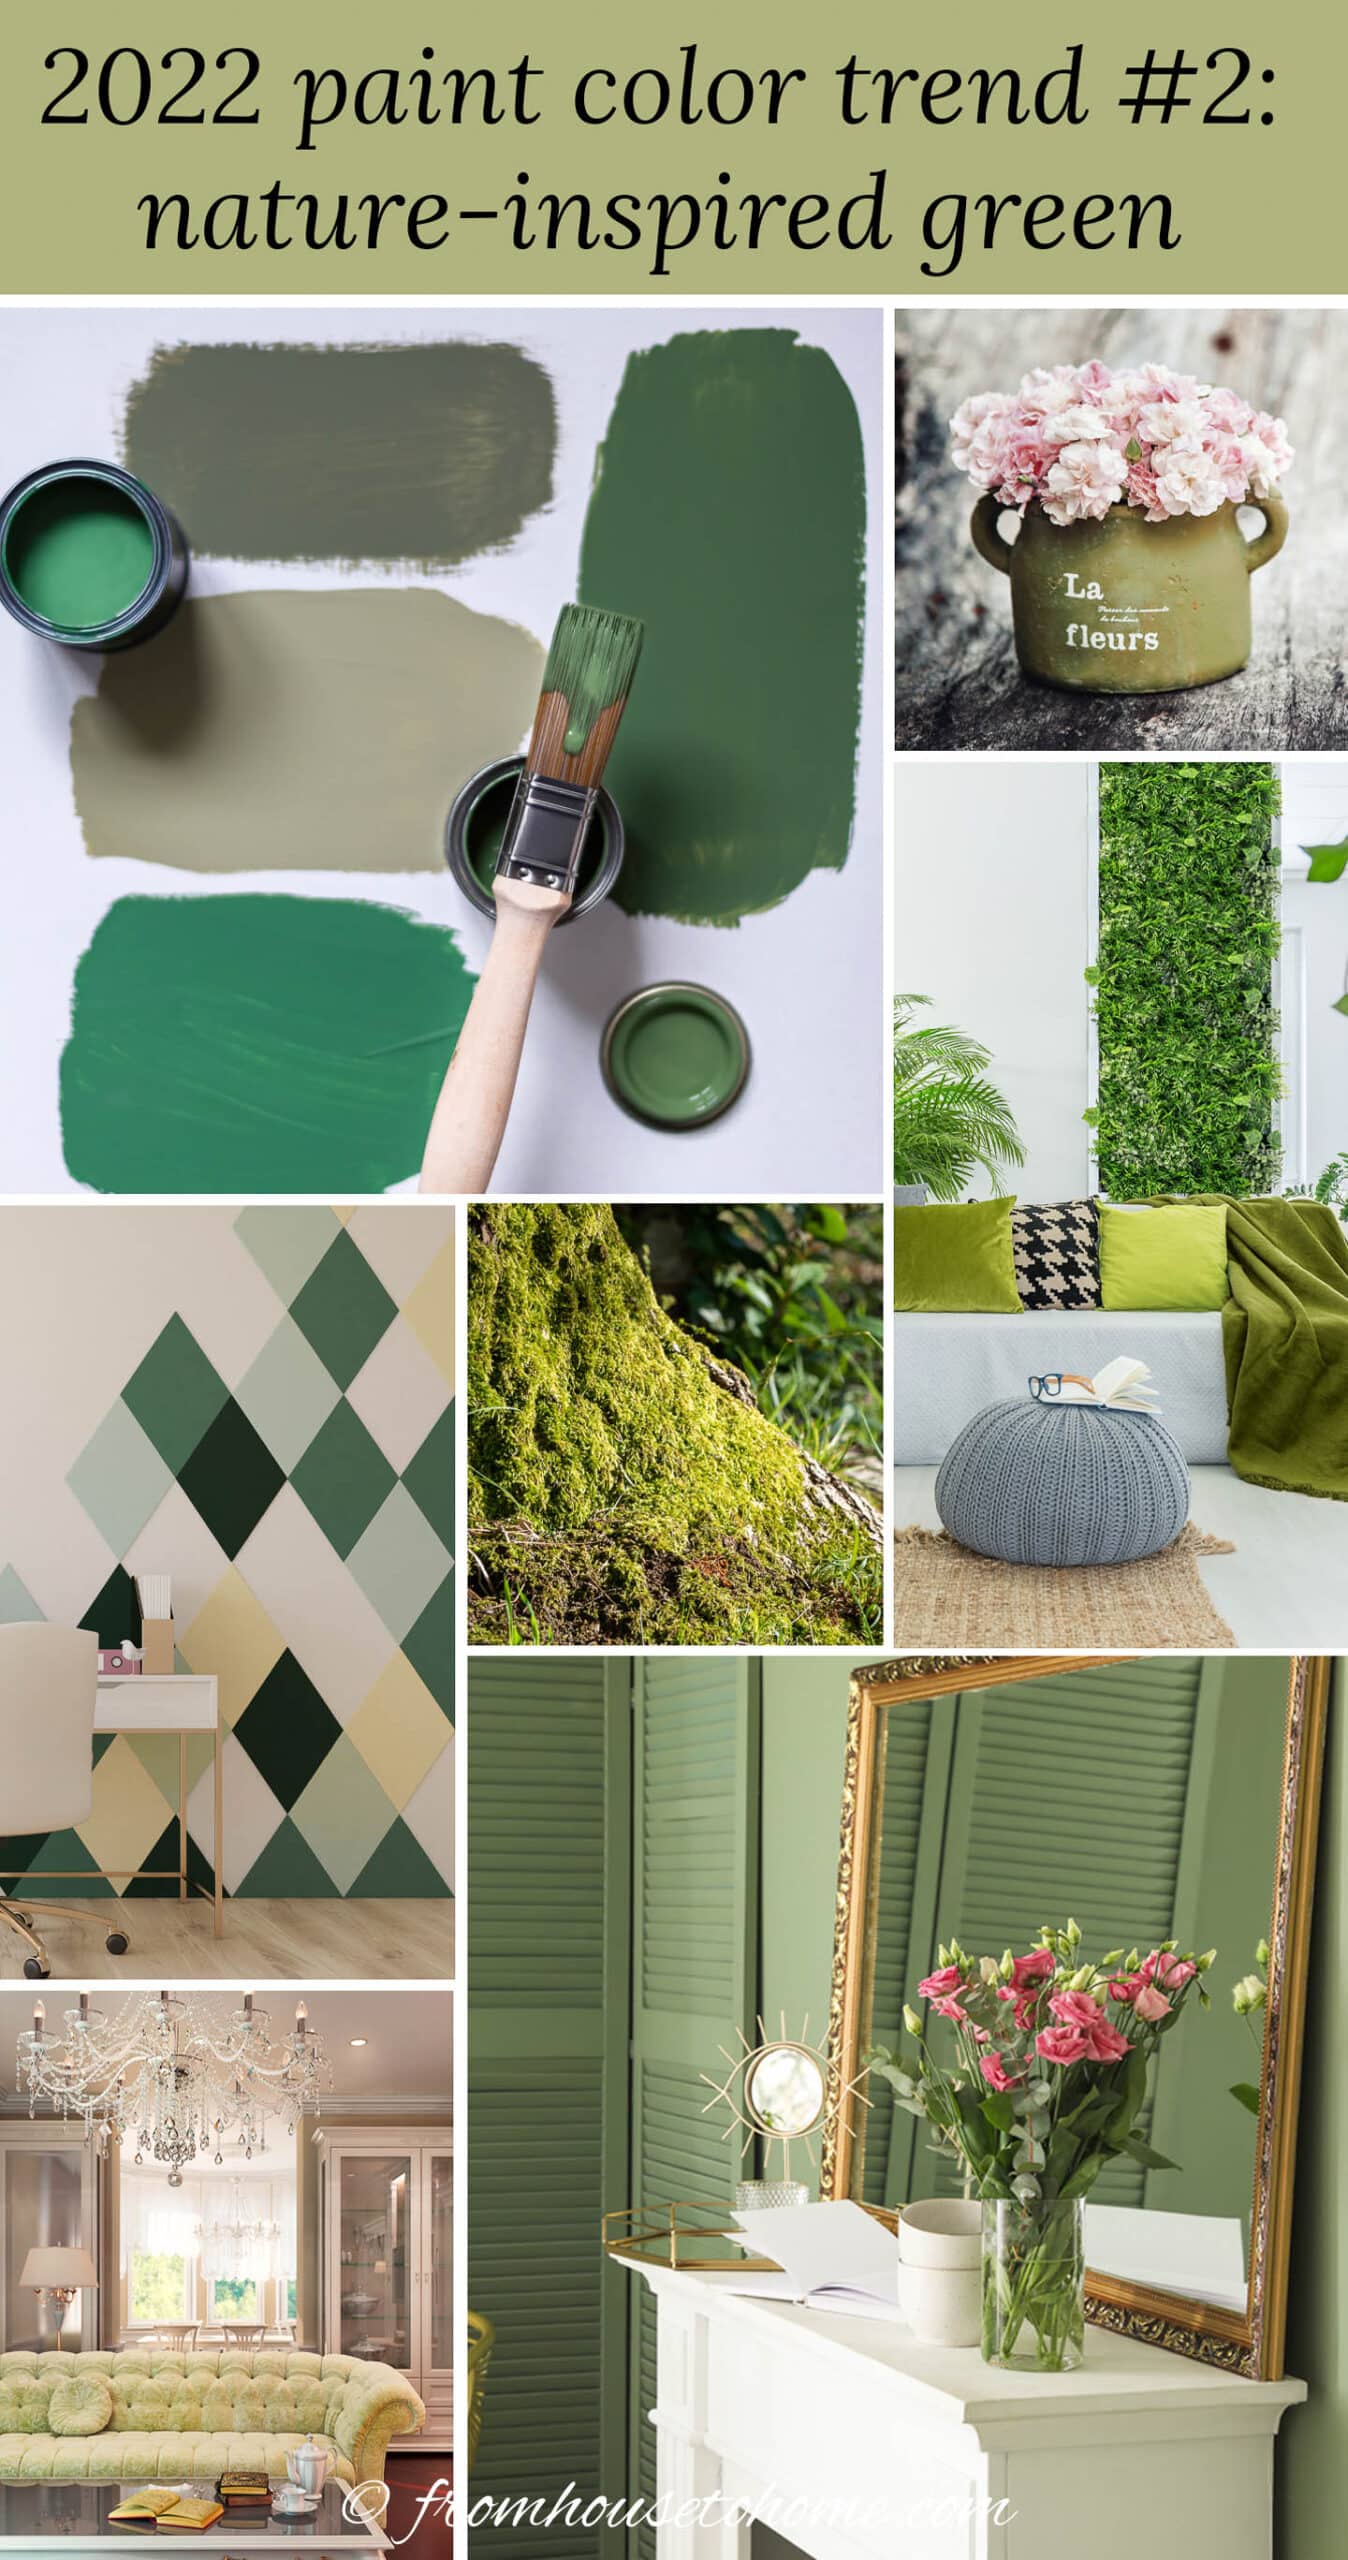 nature-inspired green pictures including paint swatches, a green container with pink carnations, a living room sofa with green cushions and blanket, an office wall painted with green diamonds, a mossy tree trunk, a living room painted in mossy green and a light green velvet sofa